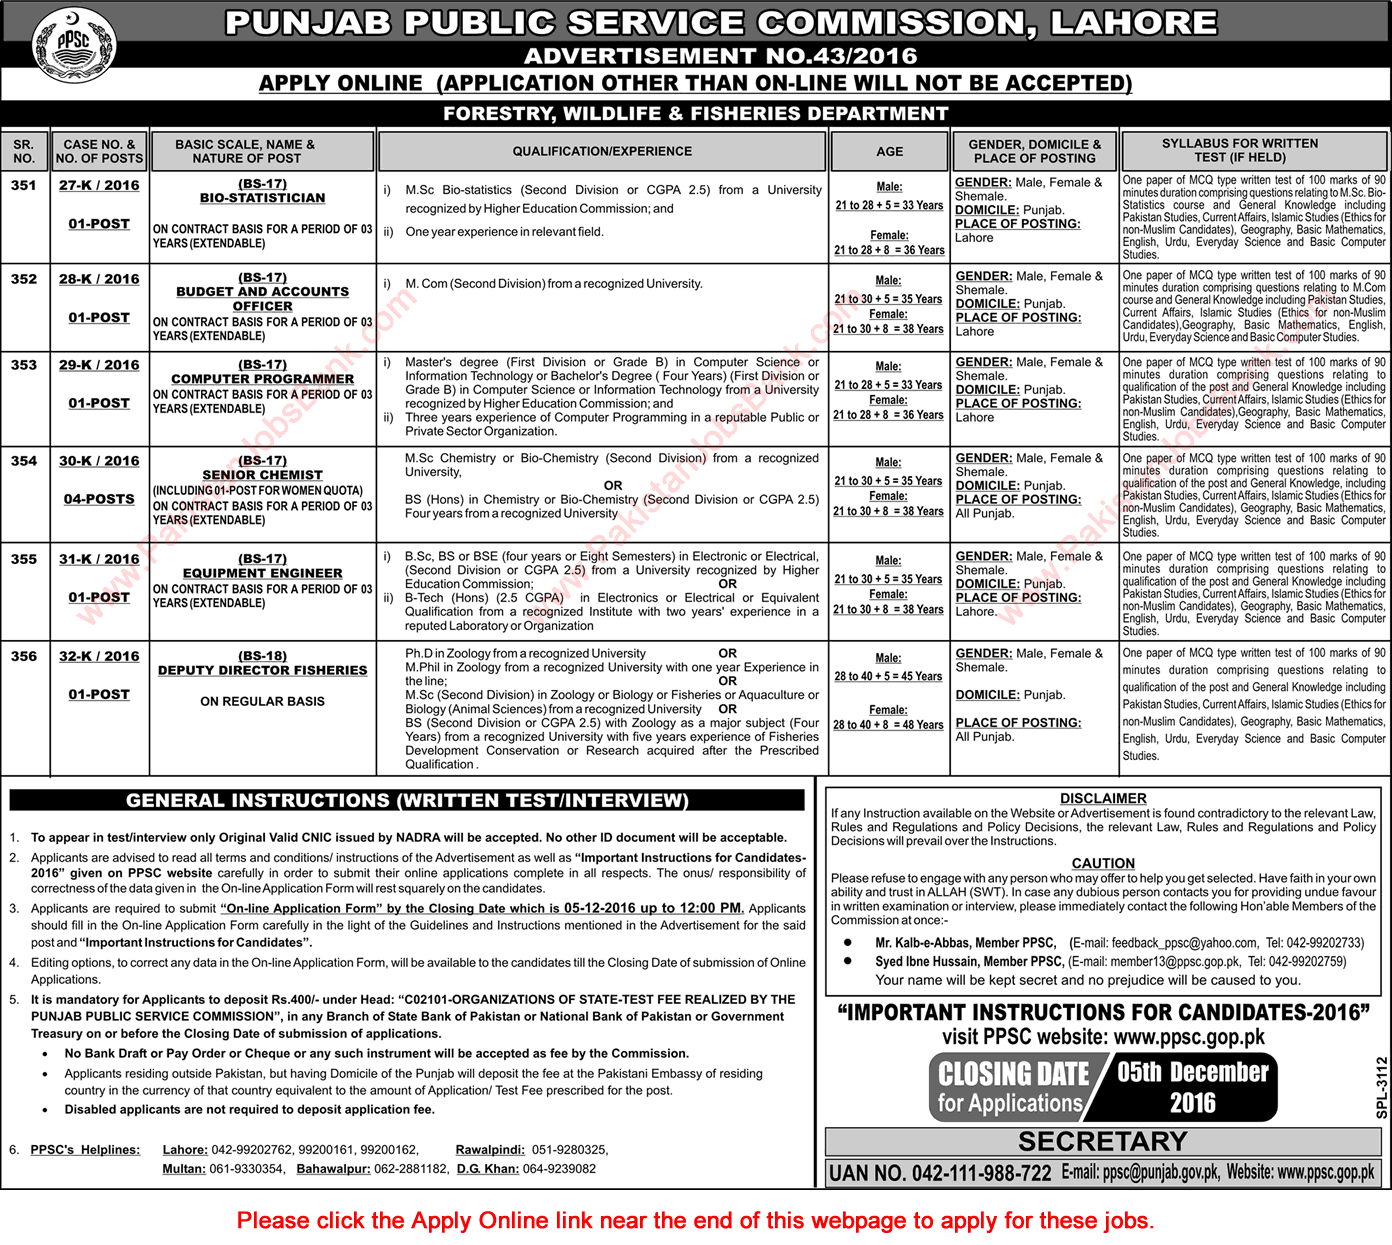 PPSC Jobs November 2016 Consolidated Advertisement No 43/2016 Apply Online Latest